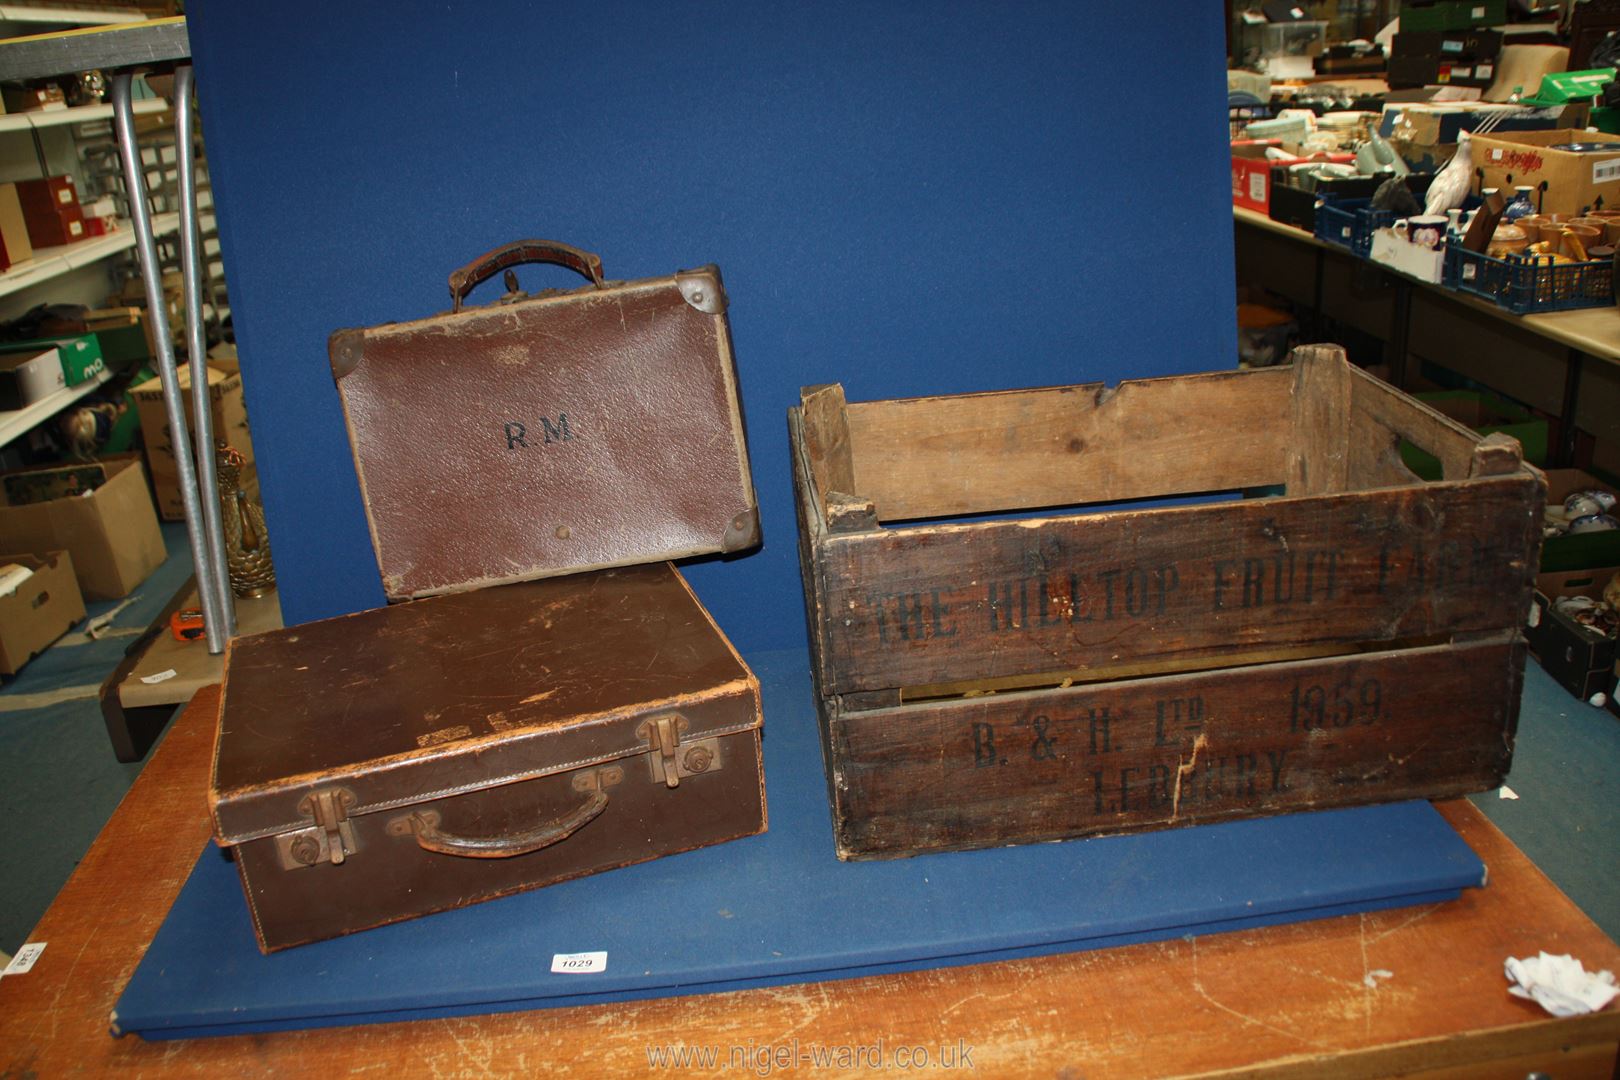 A wooden crate for The Hill Top Fruit Farm, Ledbury and two small suitcases.